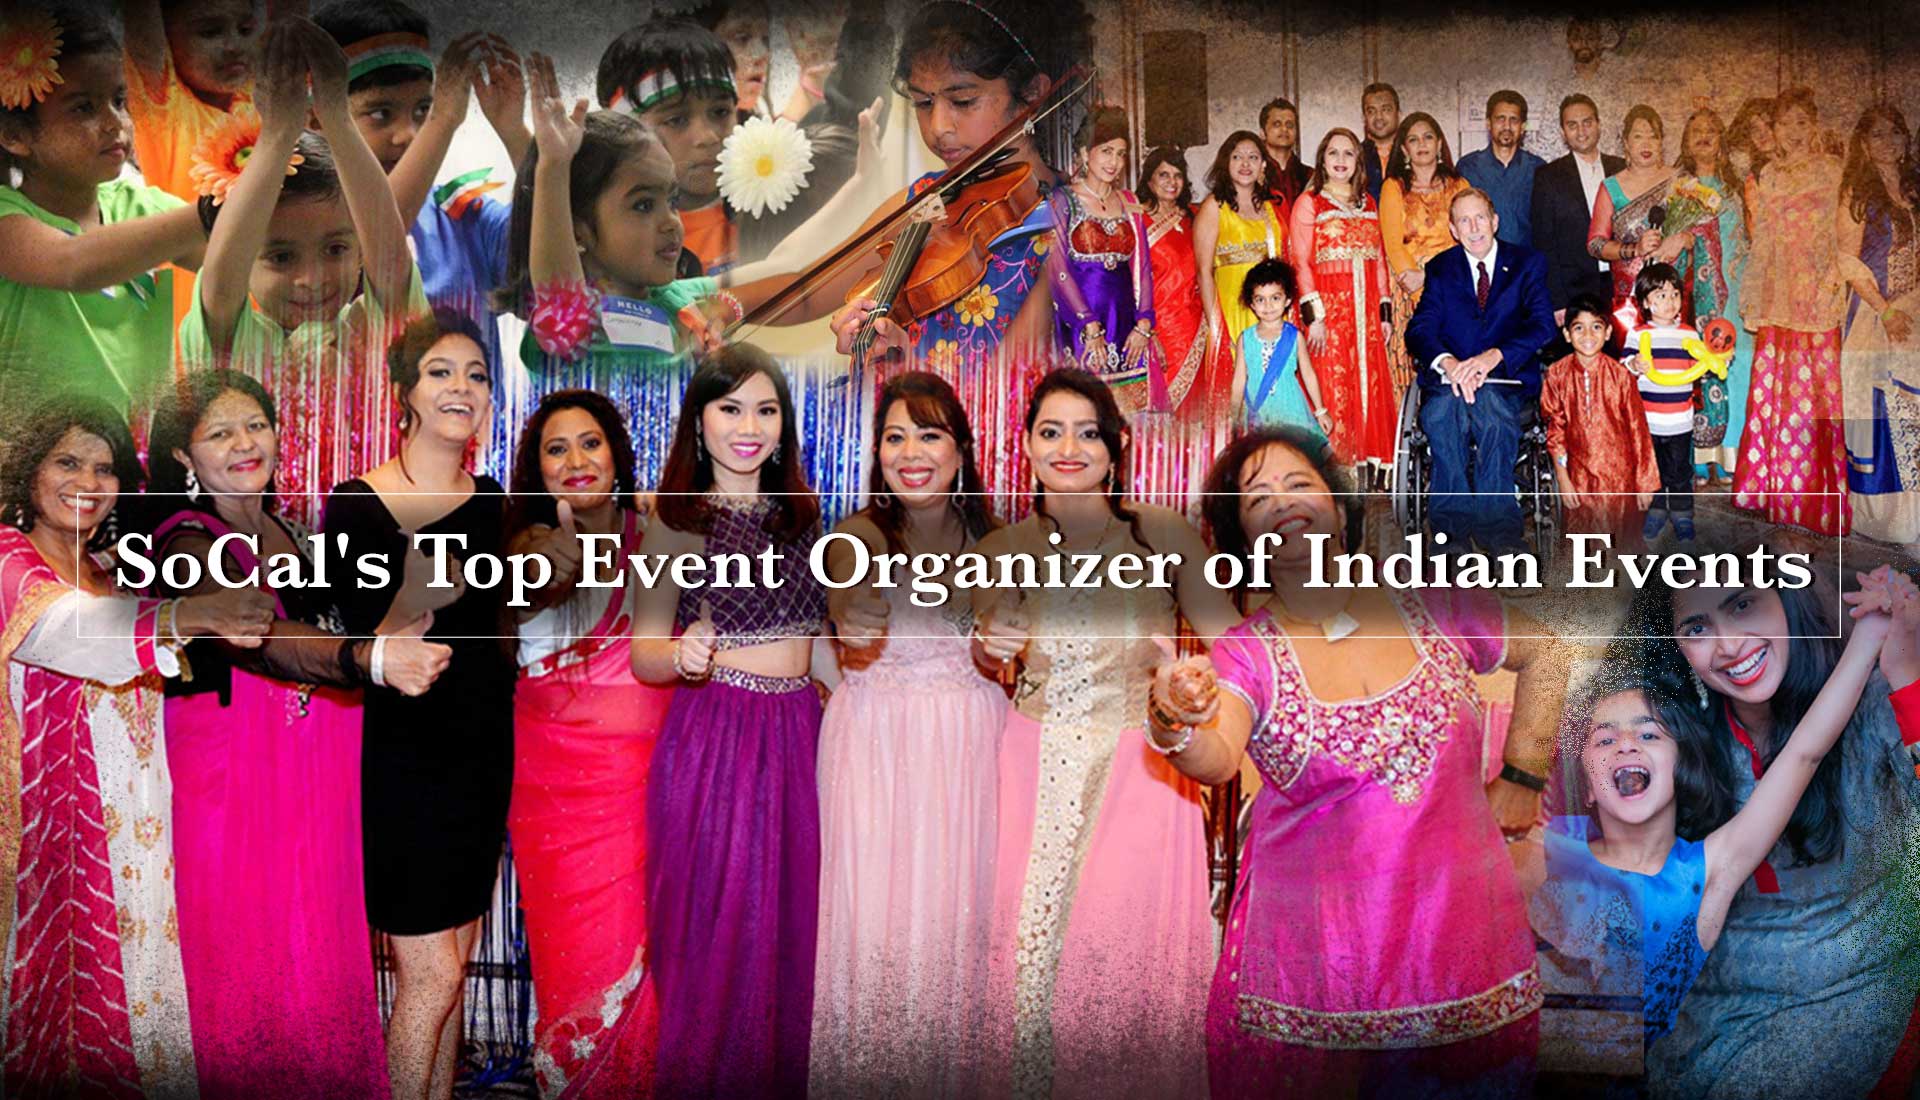 Our Indian Culture is SoCal's-Top-Event-Organizer-of-Indian-Events